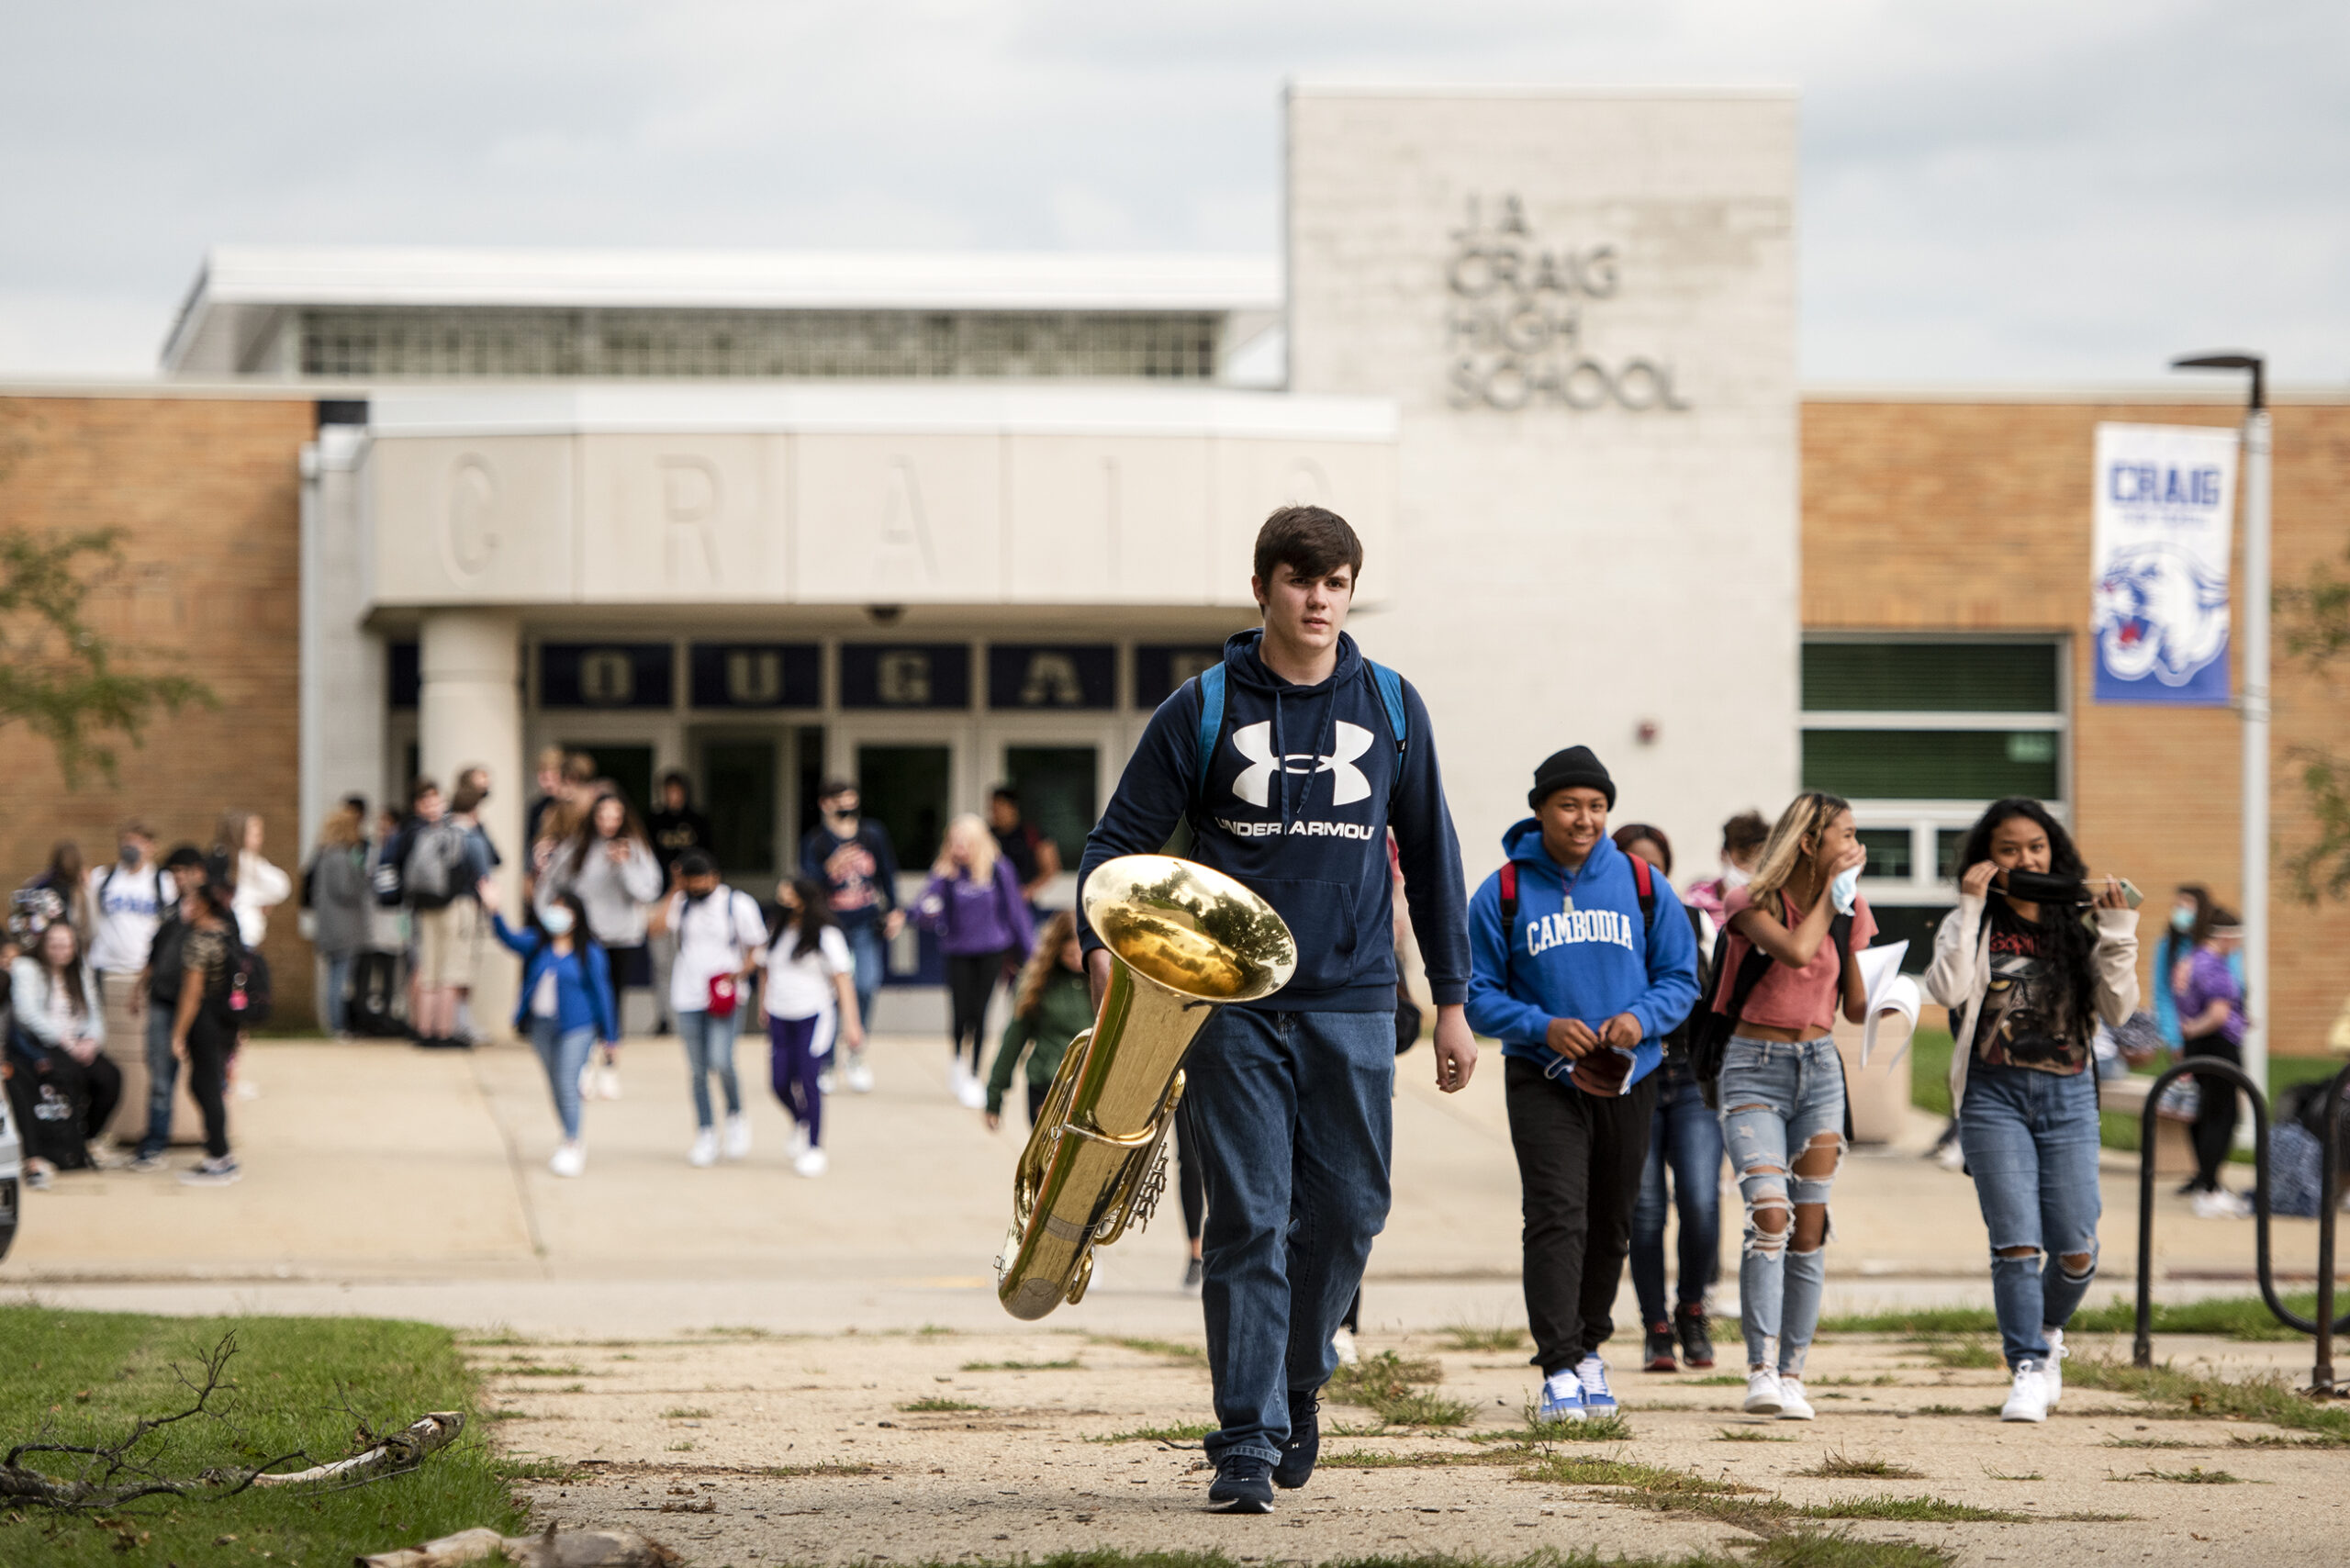 a student carries a tuba in his hand in a crowd of other students exiting a high school